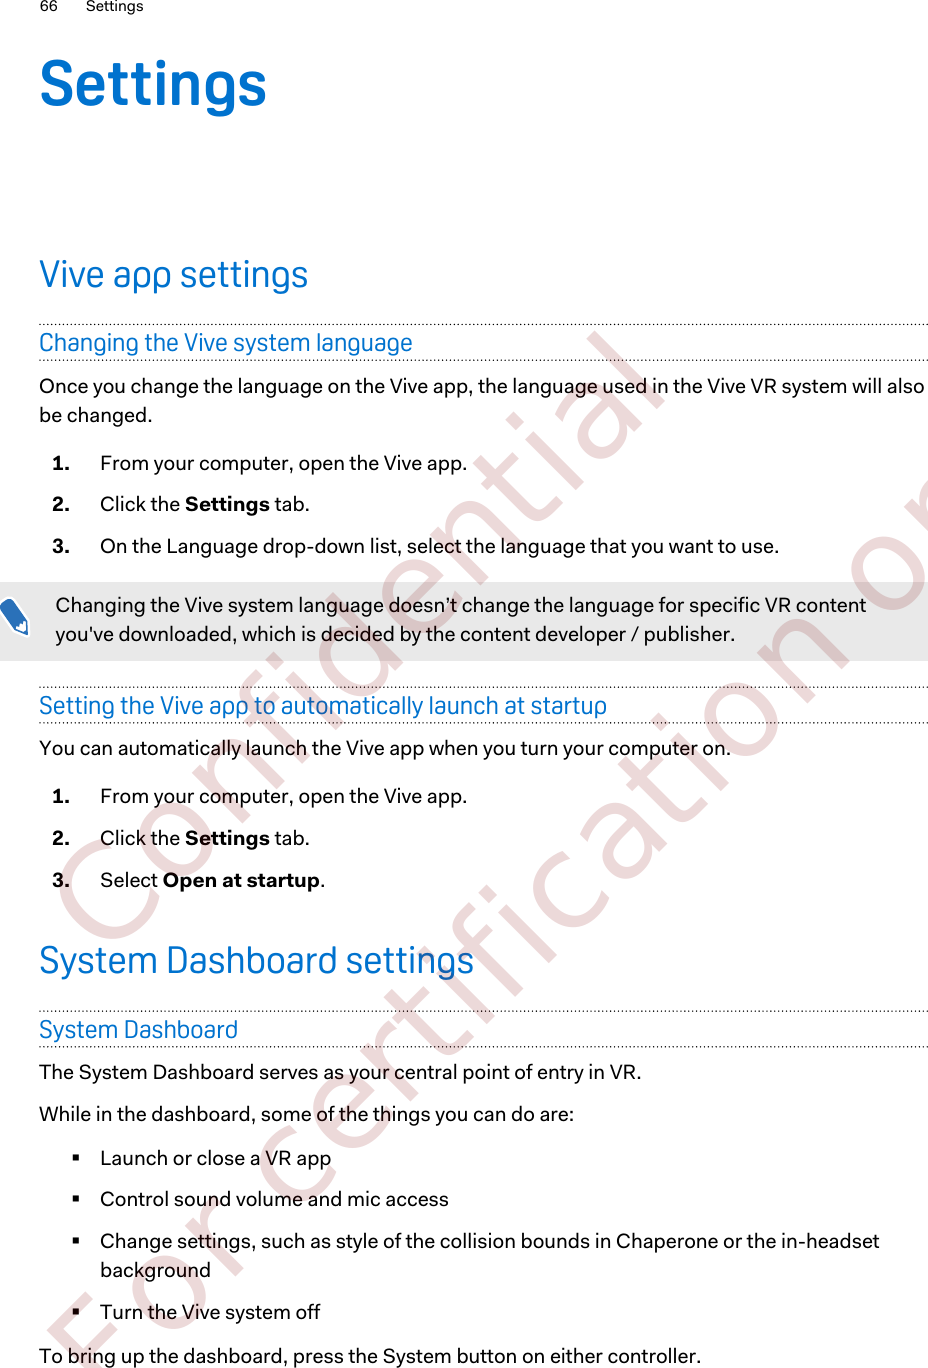 SettingsVive app settingsChanging the Vive system languageOnce you change the language on the Vive app, the language used in the Vive VR system will alsobe changed.1. From your computer, open the Vive app.2. Click the Settings tab.3. On the Language drop-down list, select the language that you want to use.Changing the Vive system language doesn’t change the language for specific VR contentyou&apos;ve downloaded, which is decided by the content developer / publisher.Setting the Vive app to automatically launch at startupYou can automatically launch the Vive app when you turn your computer on.1. From your computer, open the Vive app.2. Click the Settings tab.3. Select Open at startup.System Dashboard settingsSystem DashboardThe System Dashboard serves as your central point of entry in VR.While in the dashboard, some of the things you can do are:§Launch or close a VR app§Control sound volume and mic access§Change settings, such as style of the collision bounds in Chaperone or the in-headsetbackground§Turn the Vive system offTo bring up the dashboard, press the System button on either controller.66 Settings        Confidential  For certification only